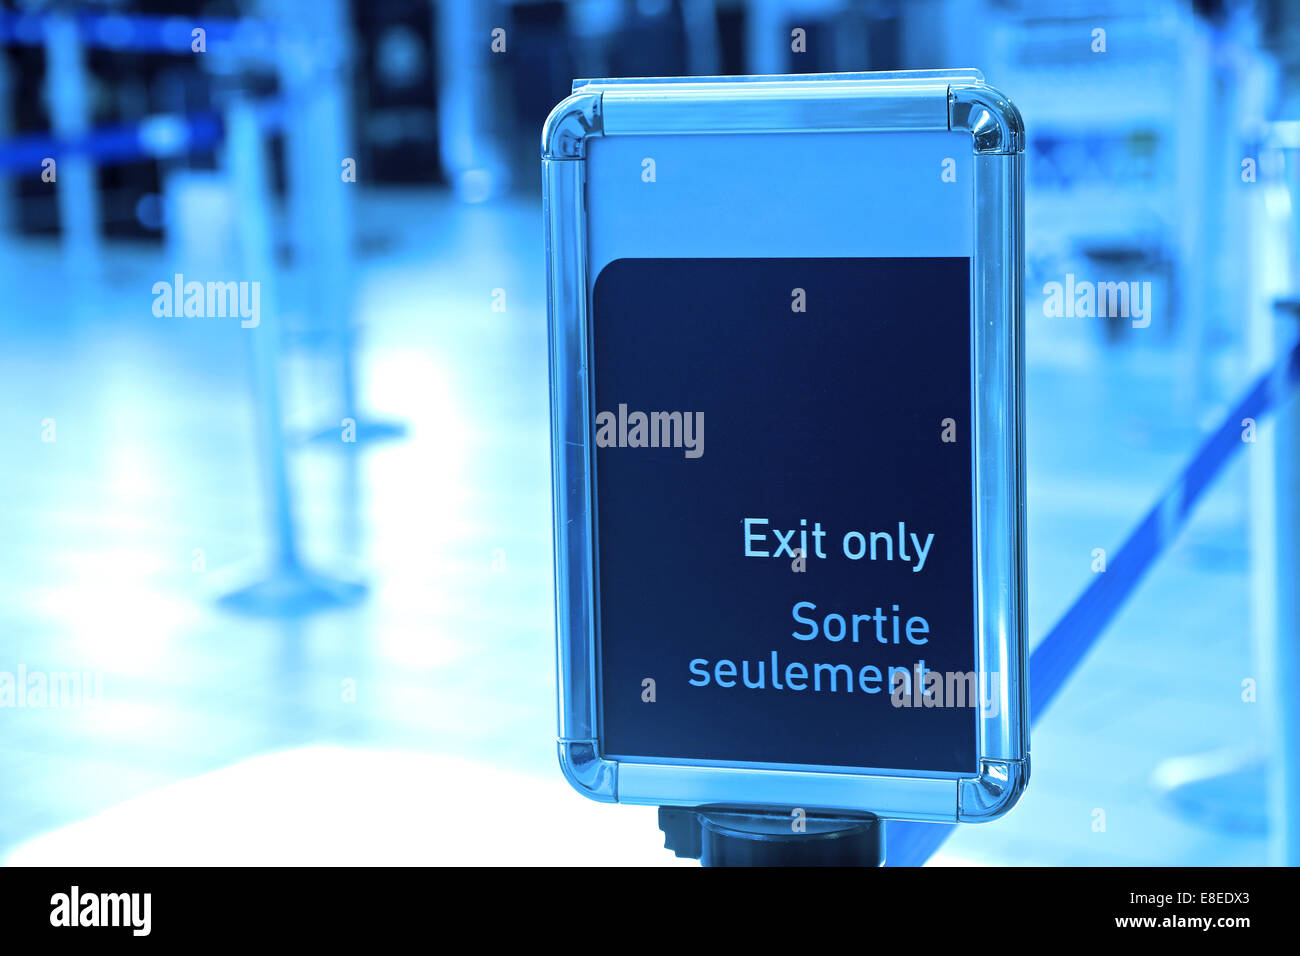 Exit sign in an airport with blue toned Stock Photo